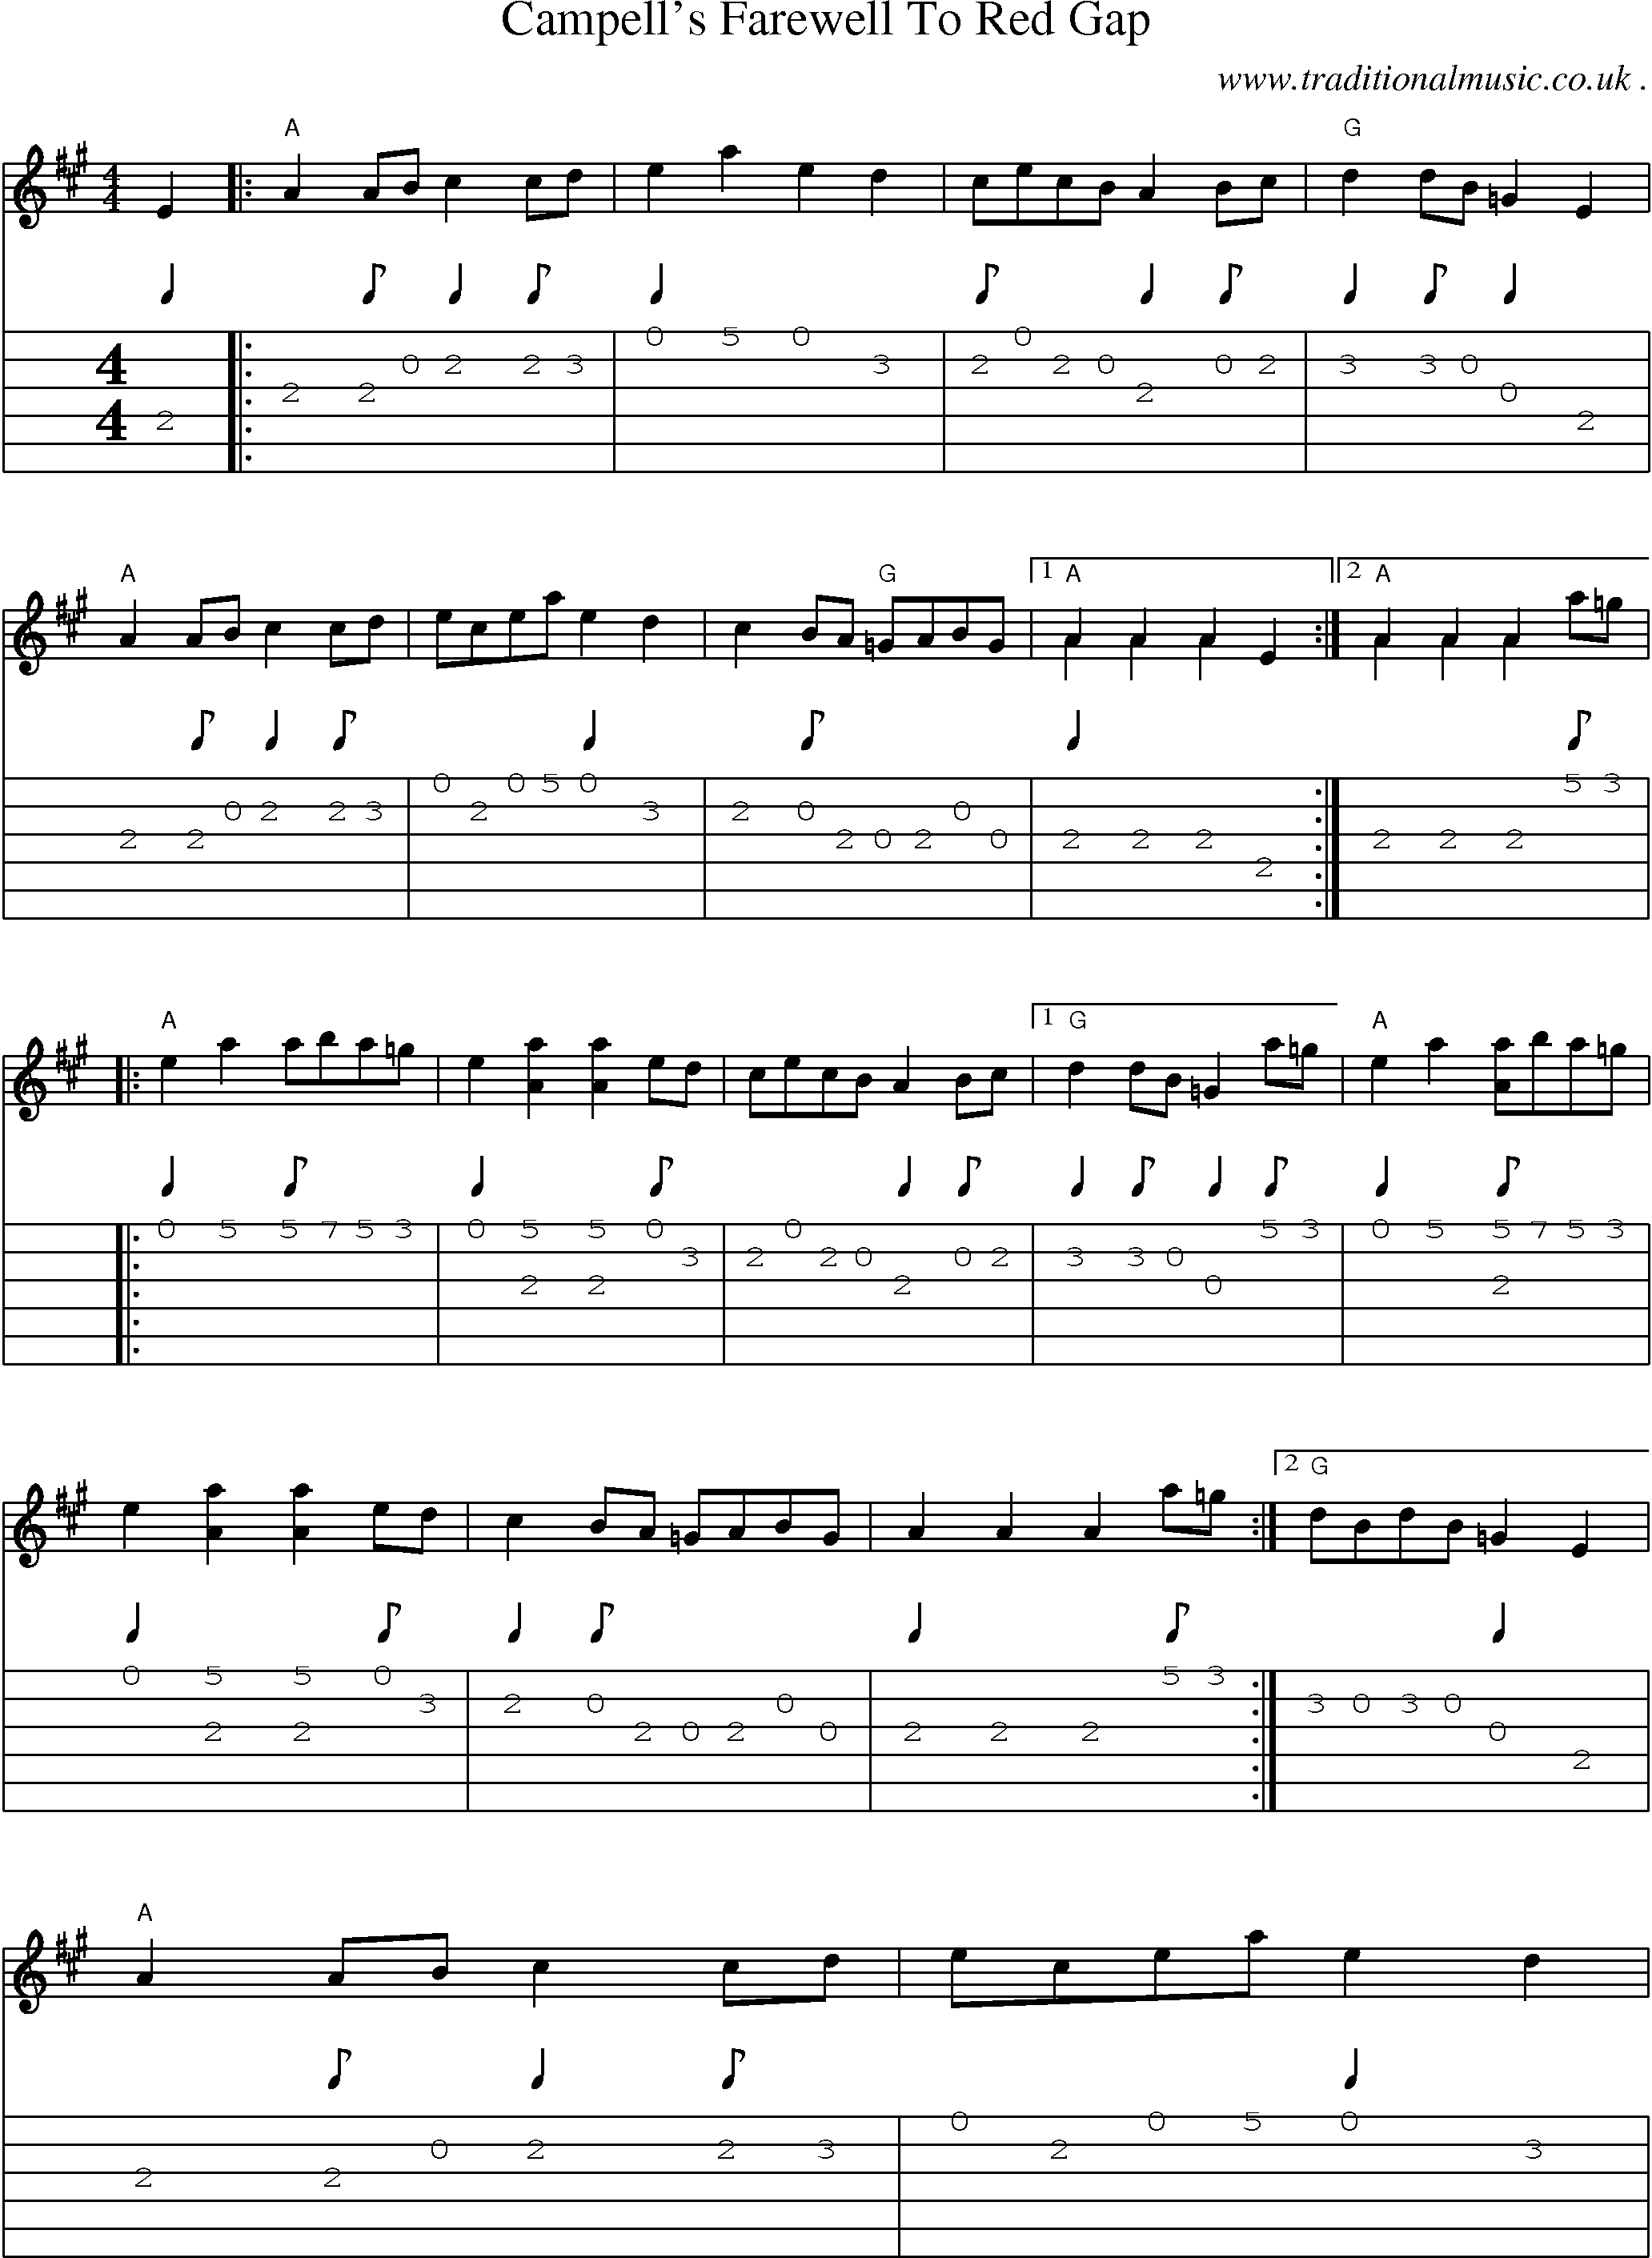 Music Score and Guitar Tabs for Campells Farewell To Red Gap